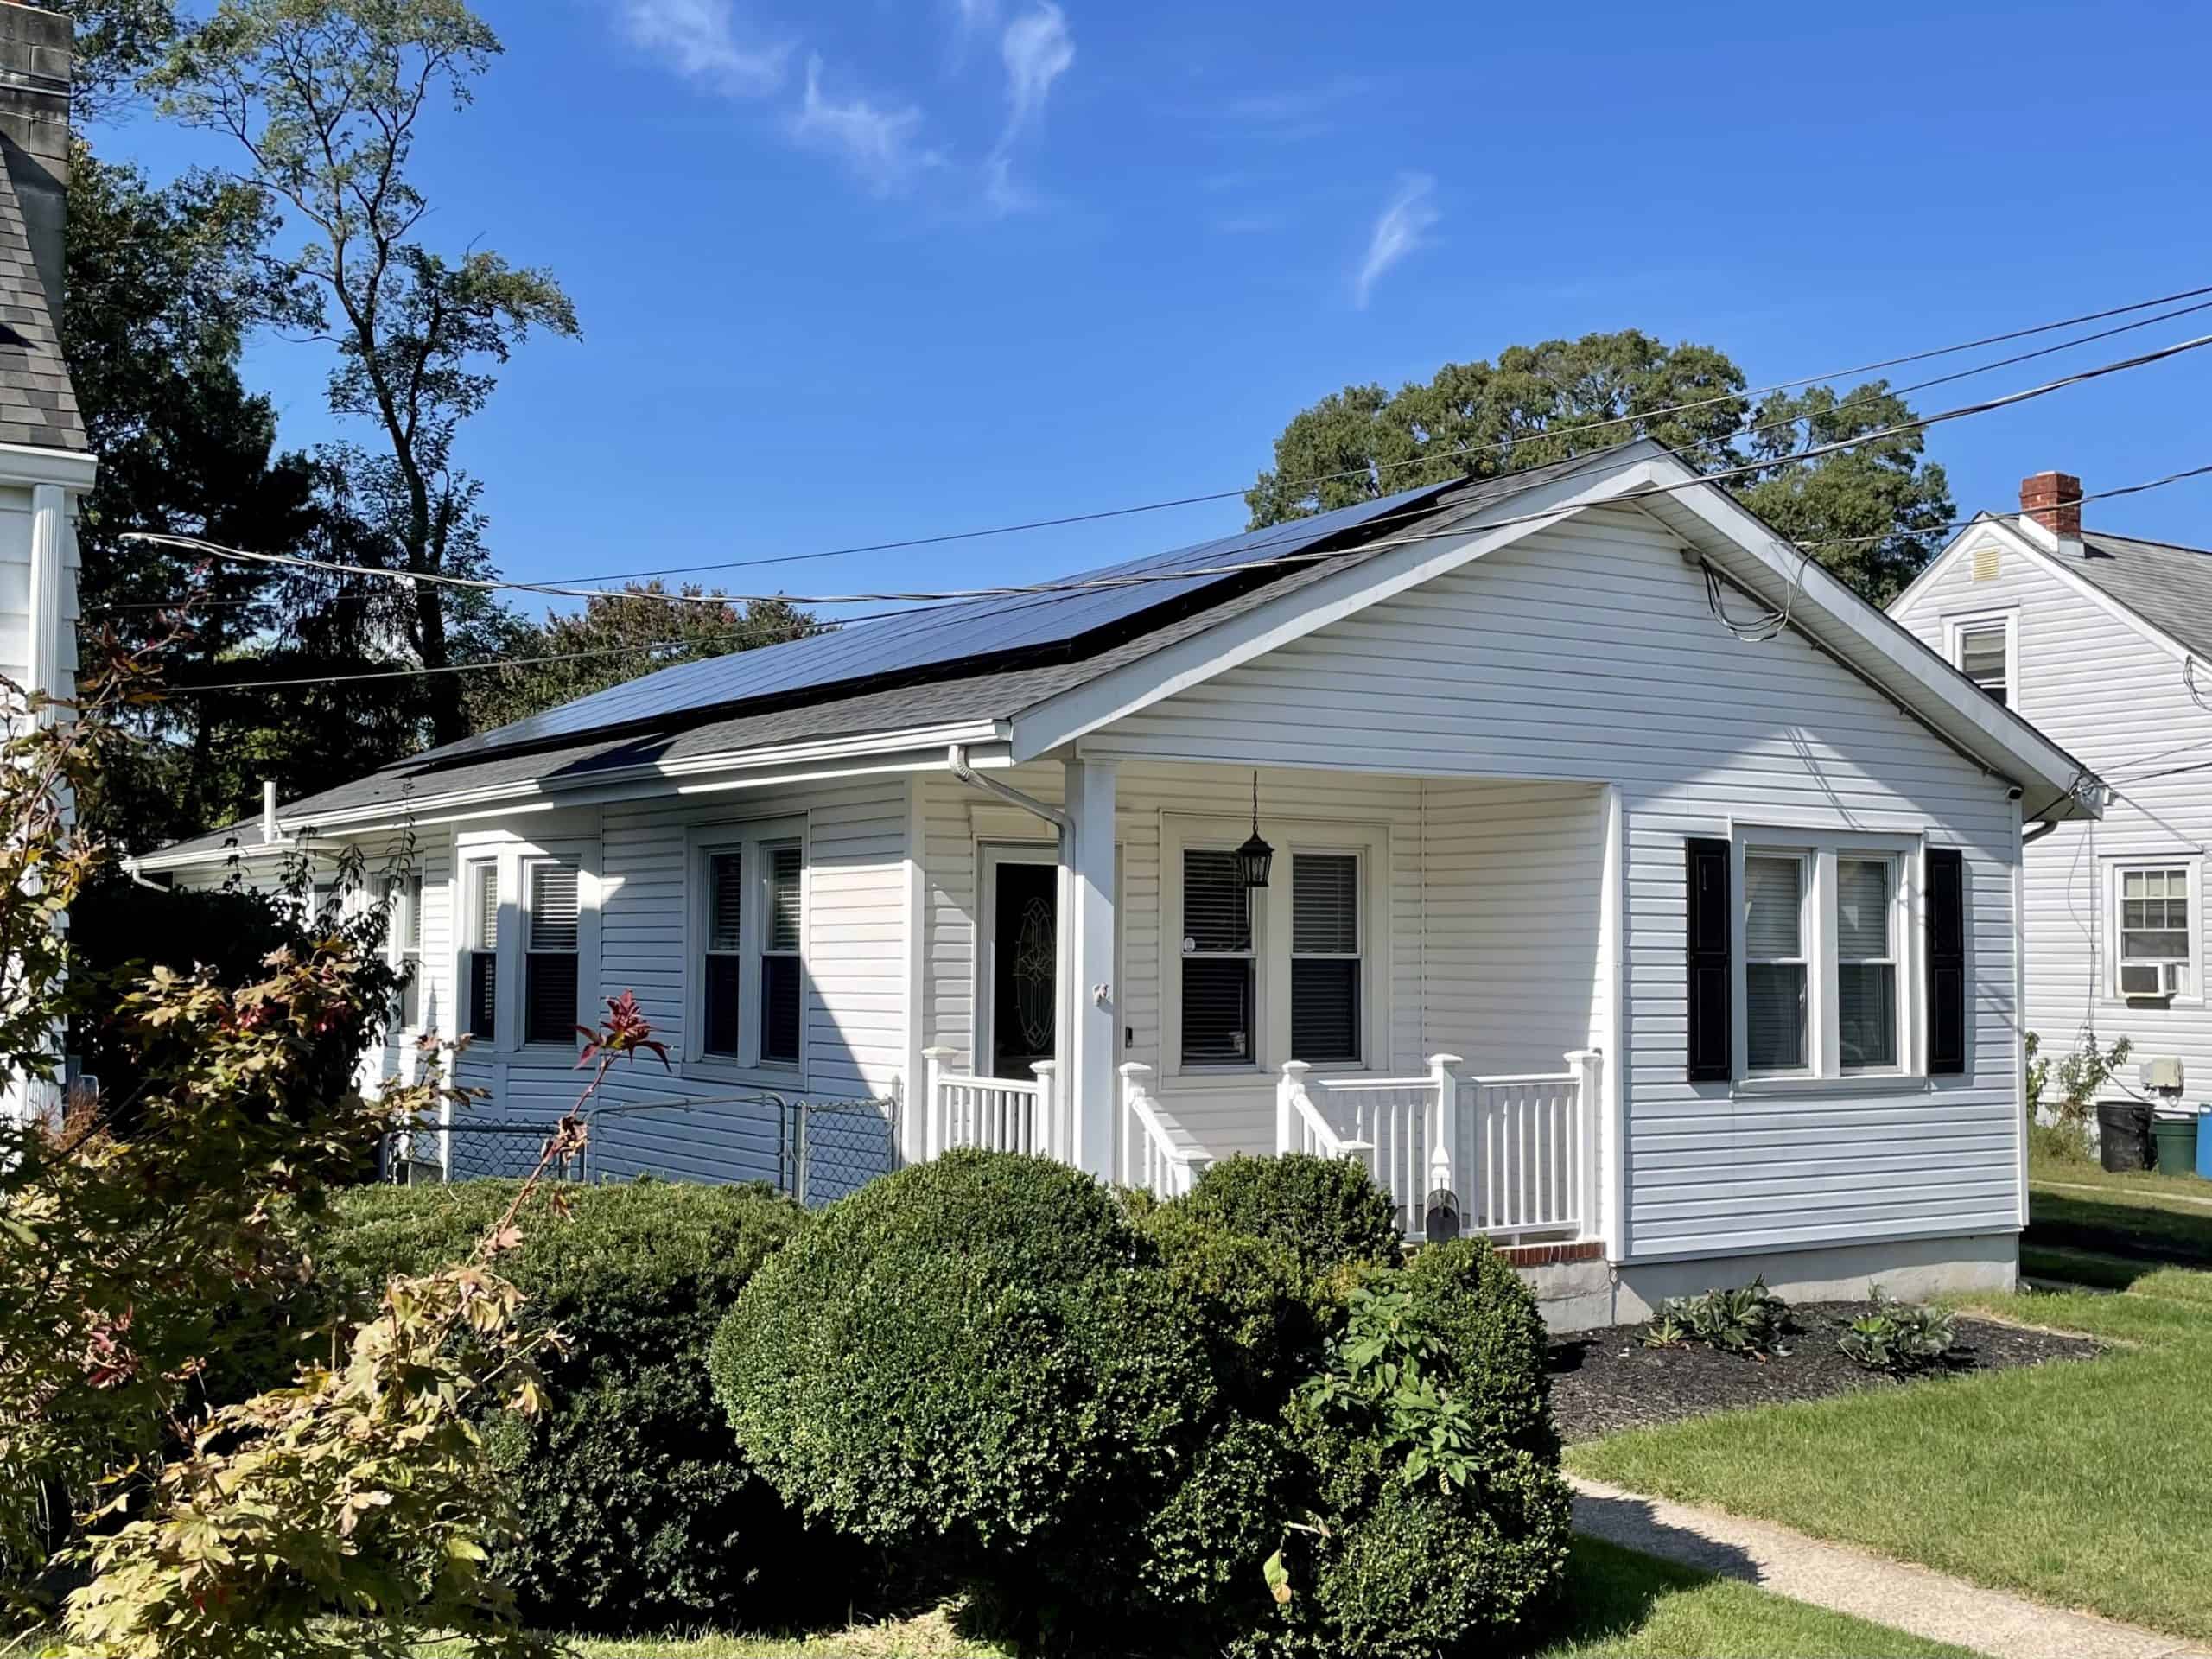 This Hamilton home installed a 7.85 kW solar system and is saving with solar!